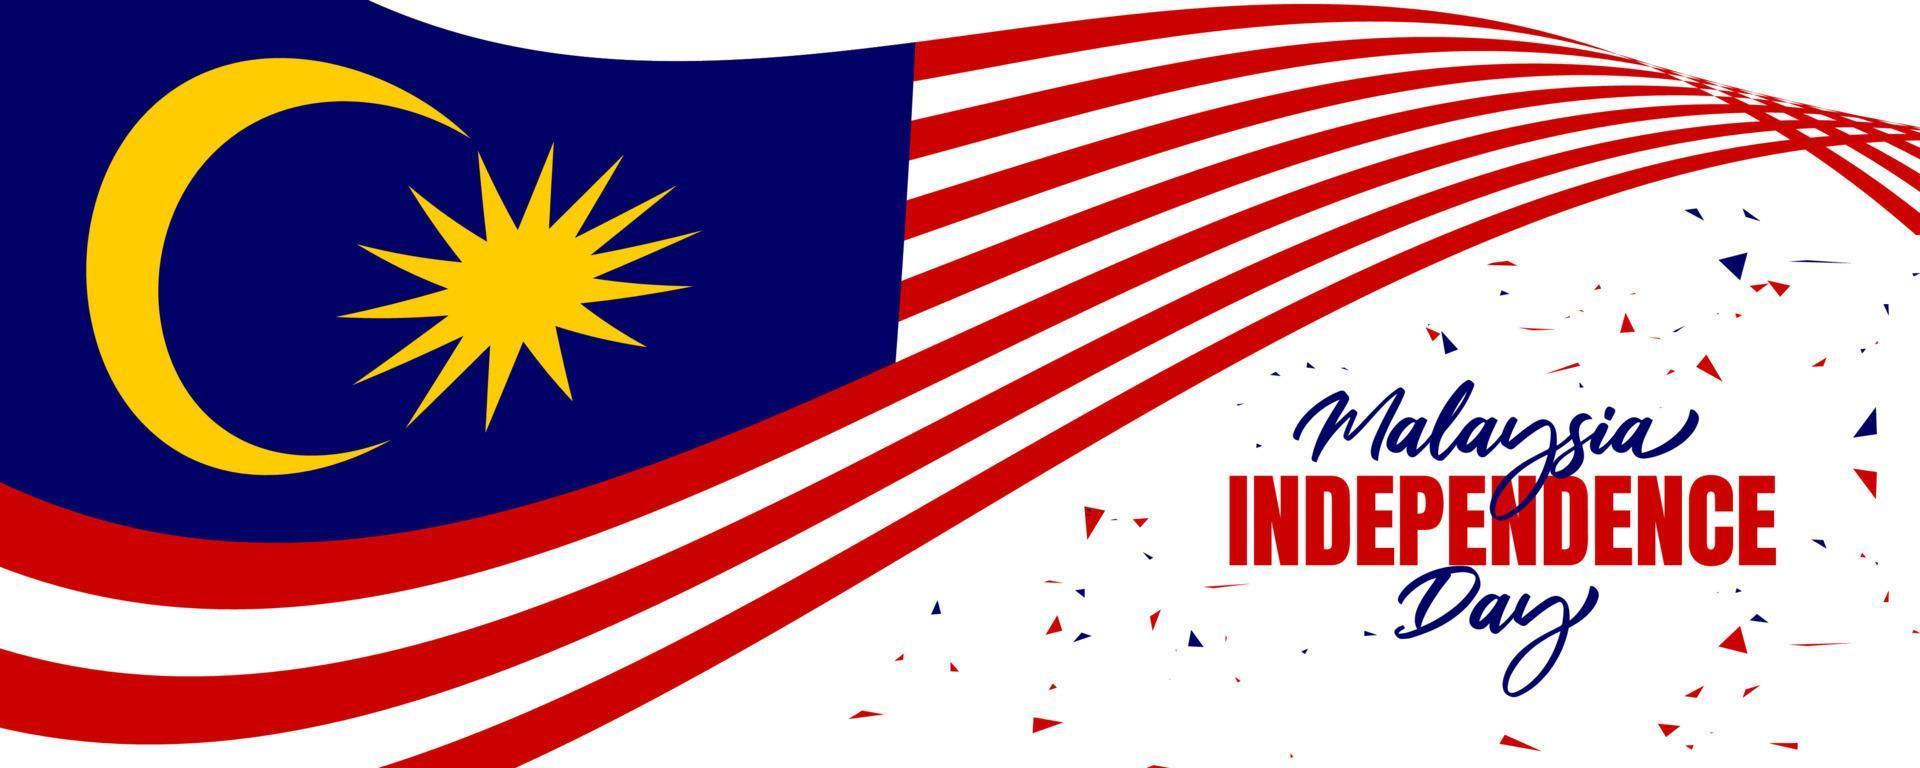 Malaysia Independence day with flag-waving 3d background design vector